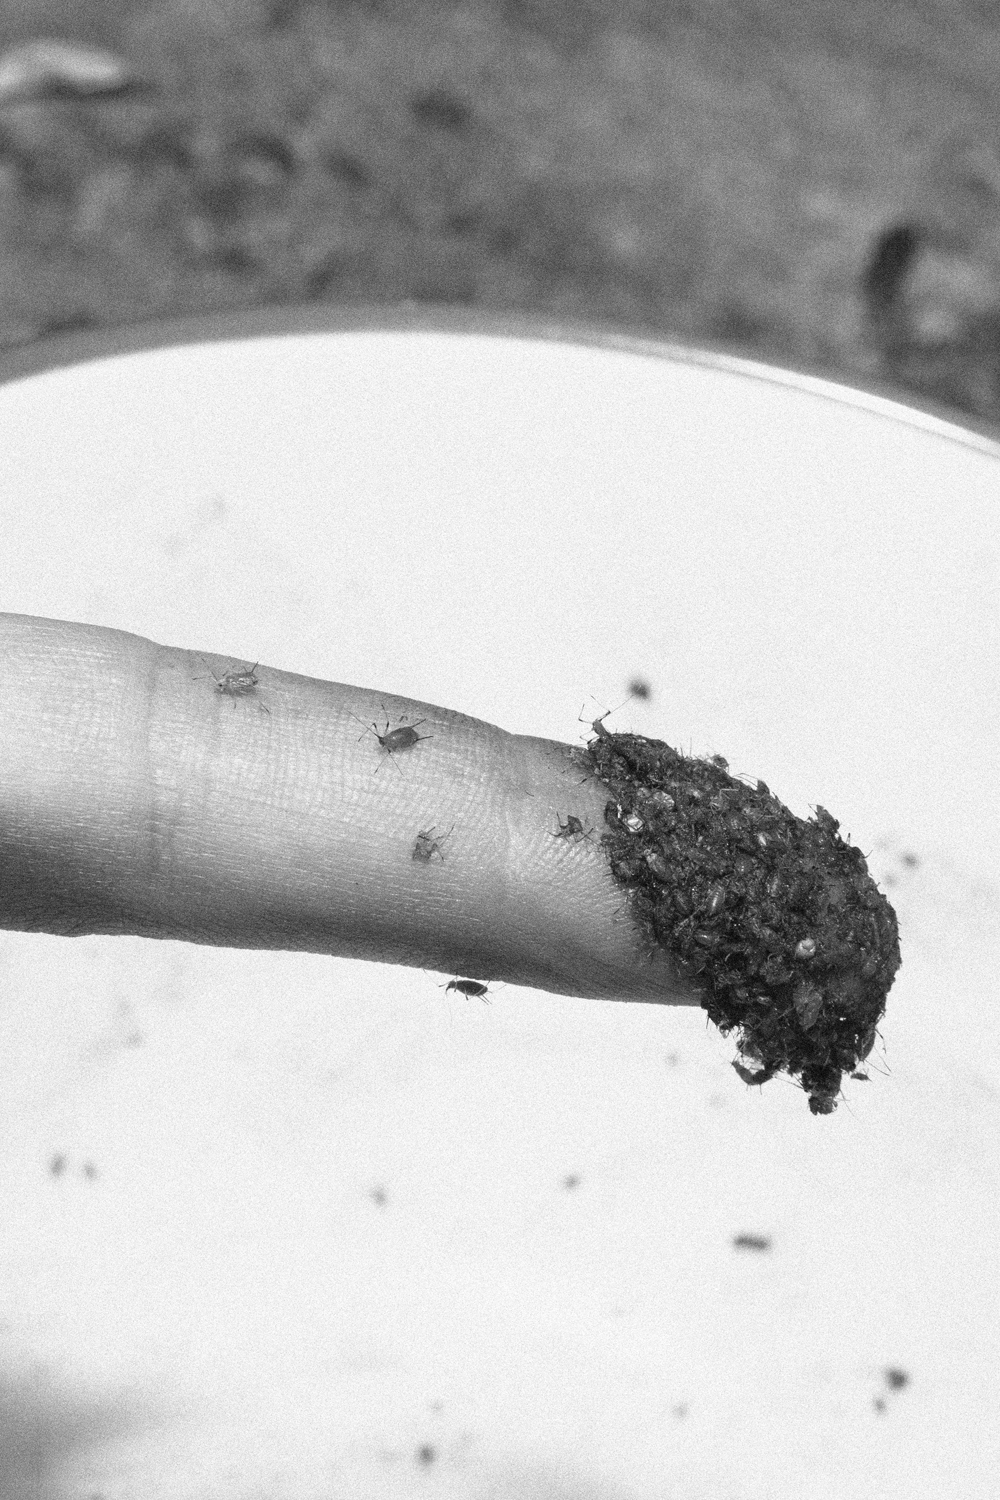 Black and white photograph depicting a fingertip covered in insects.